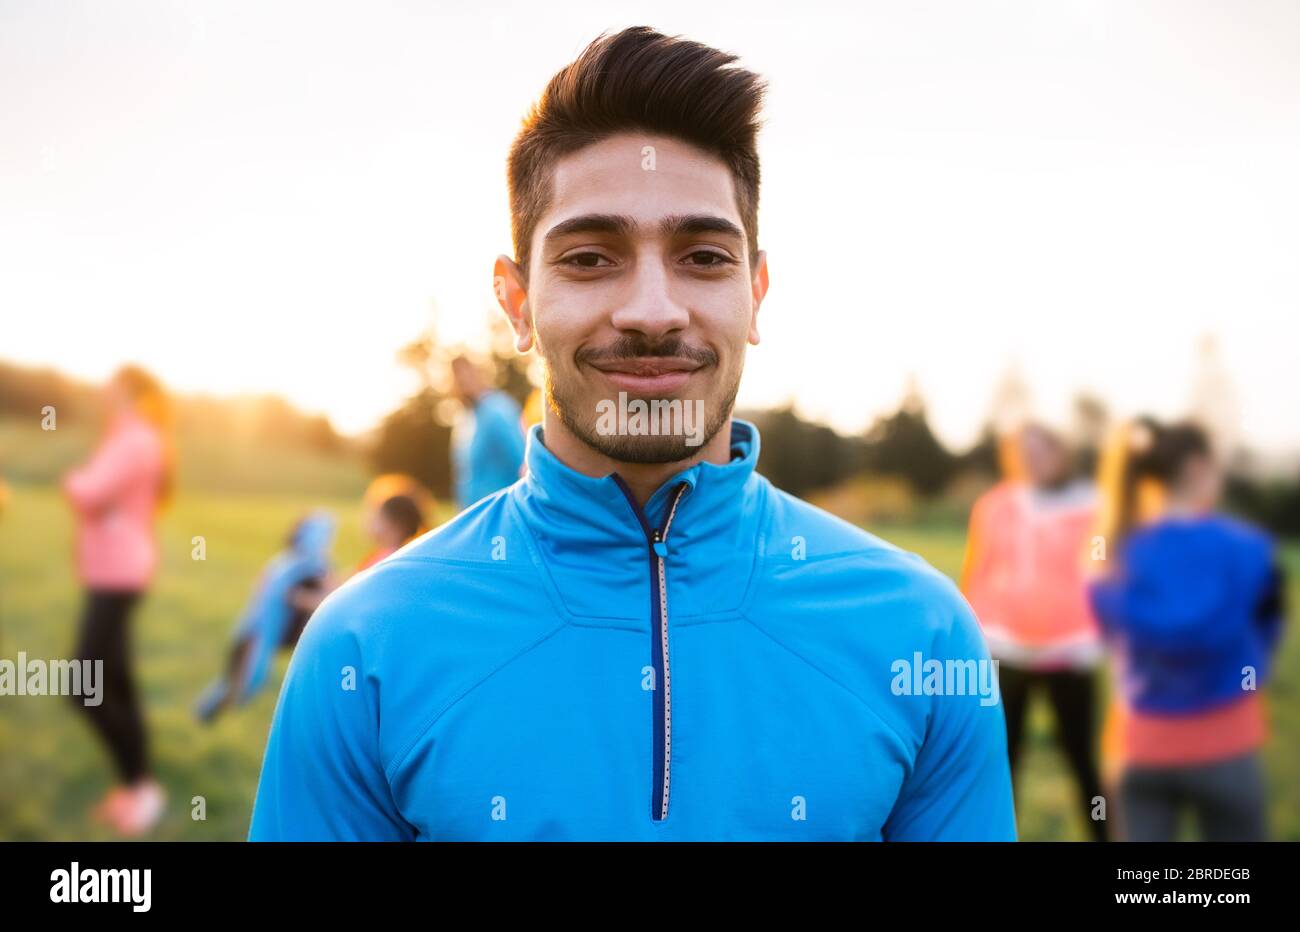 A portrait of young man with large group of people doing exercise in nature. Stock Photo